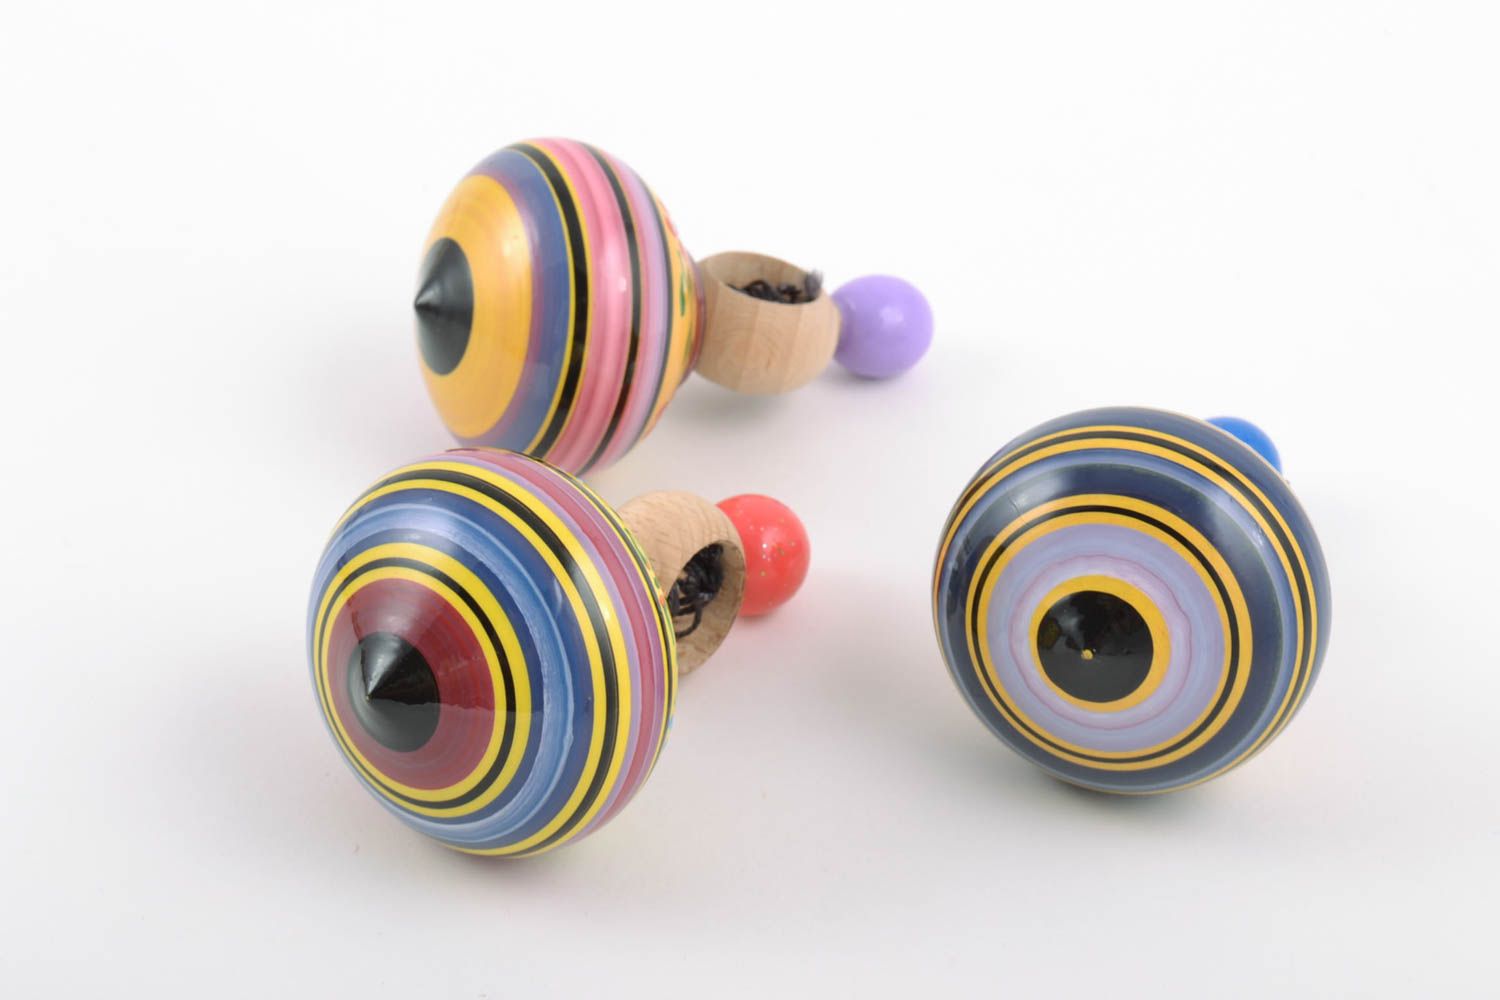 Handmade painted wooden toys set 3 pieces spinning tops with rings and strings photo 4